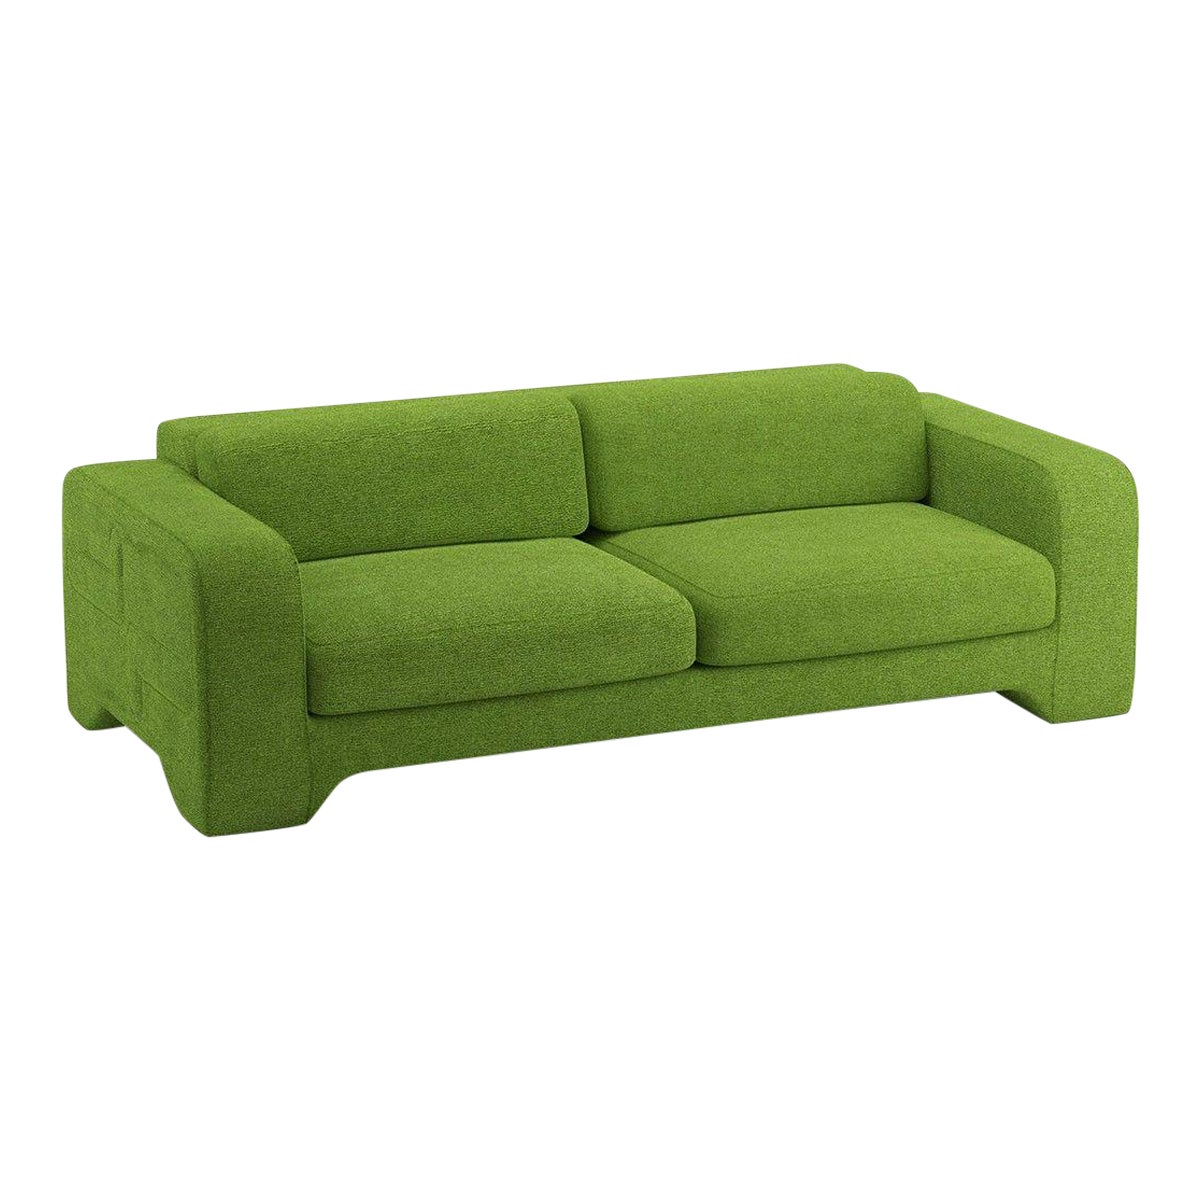 Popus Editions Giovanna 4 Seater Sofa in Grass Megeve Fabric with Knit Effect For Sale